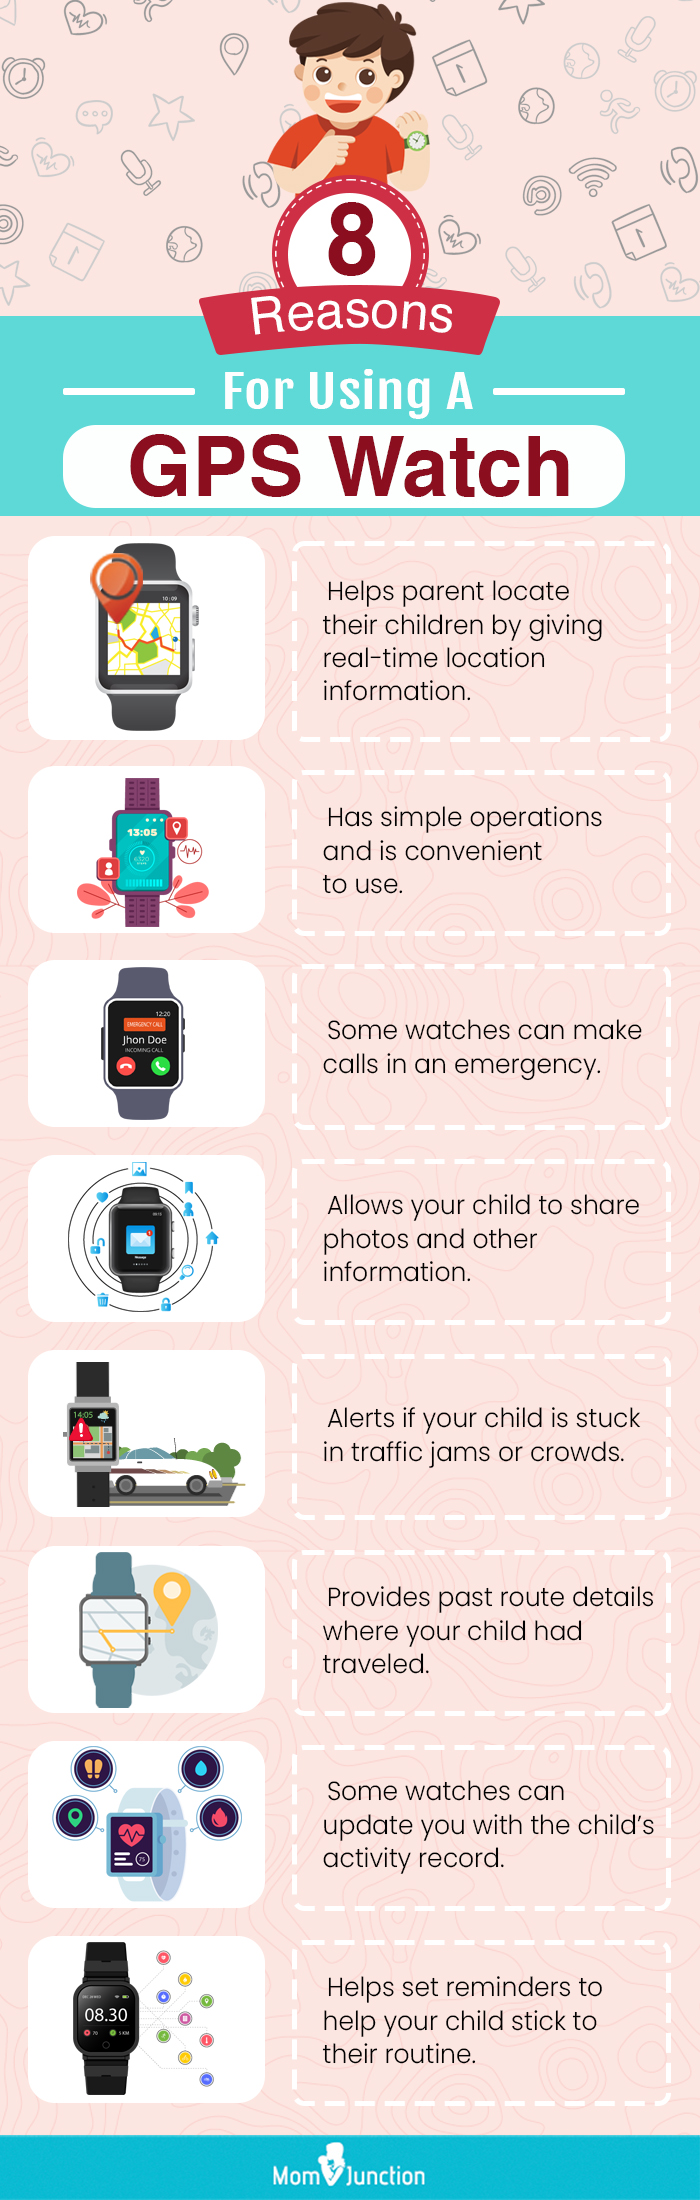 8 Reasons For Using A GPS Watch [Infographic]